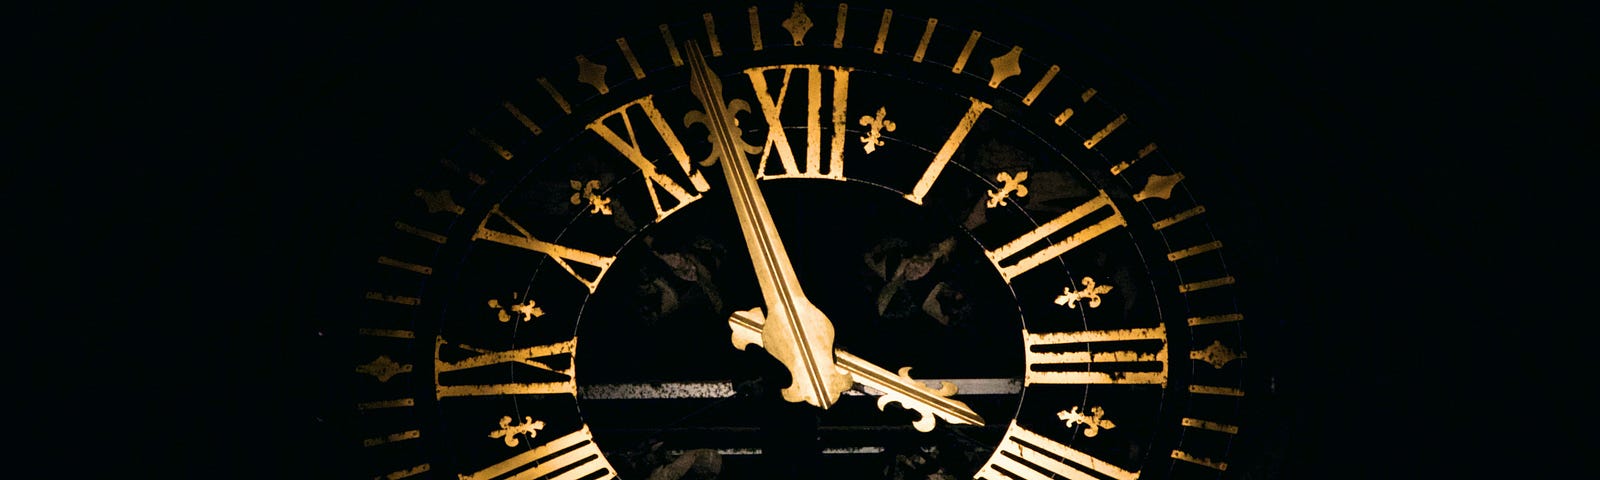 A black background behind a black clock face with gold hands and gold Roman numerals.